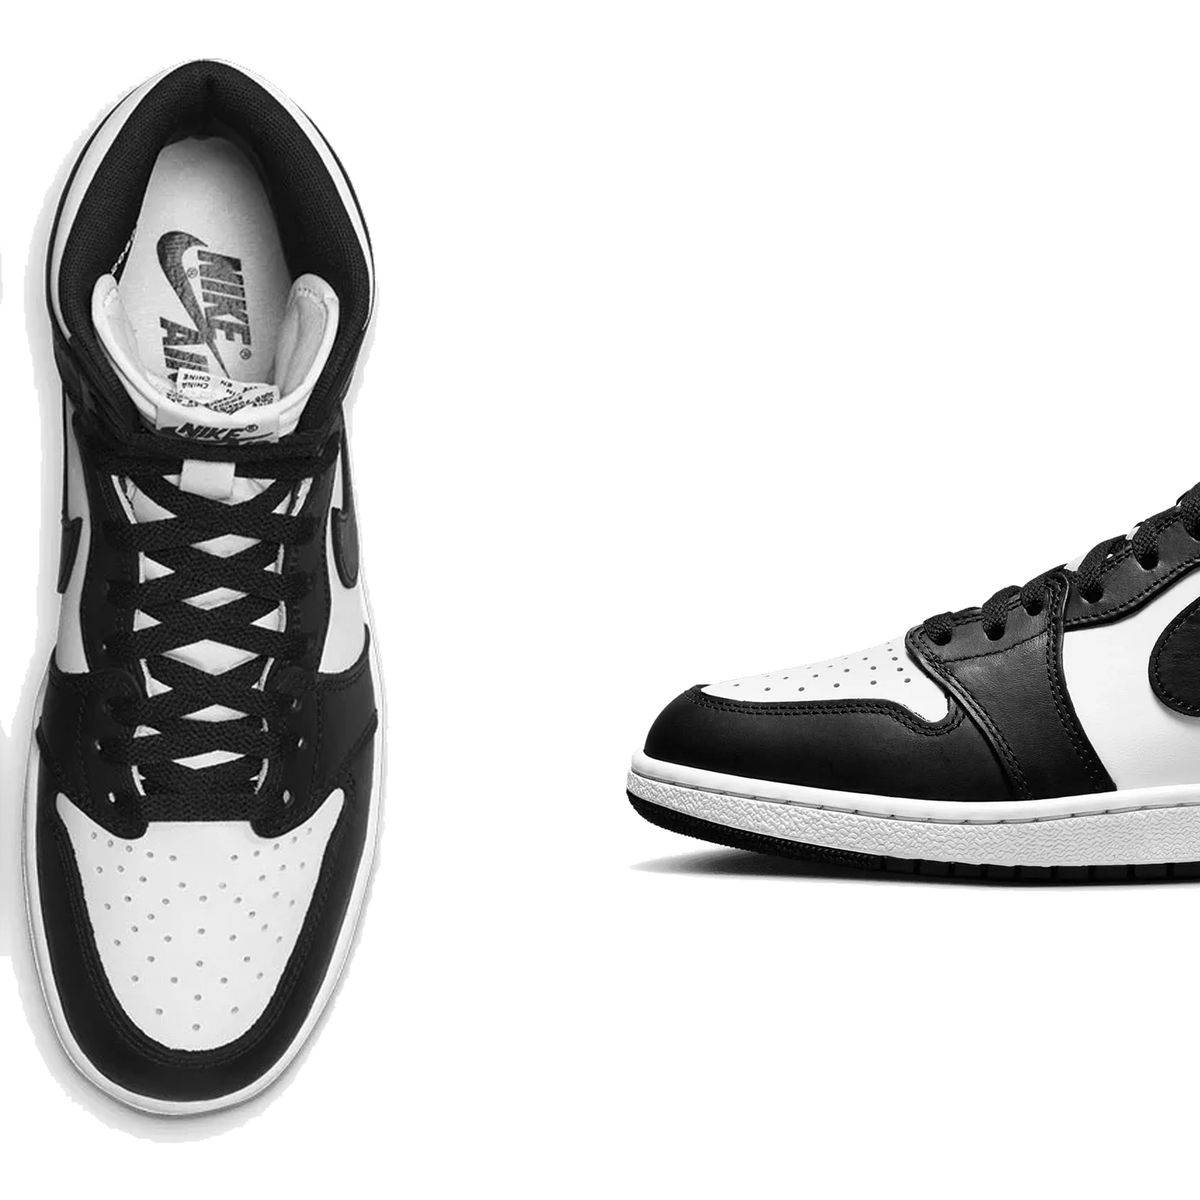 Spit draadloze Helm The Air Jordan 1 High '85 'Black/White' Is About to Drop. Here's Everything  to Know